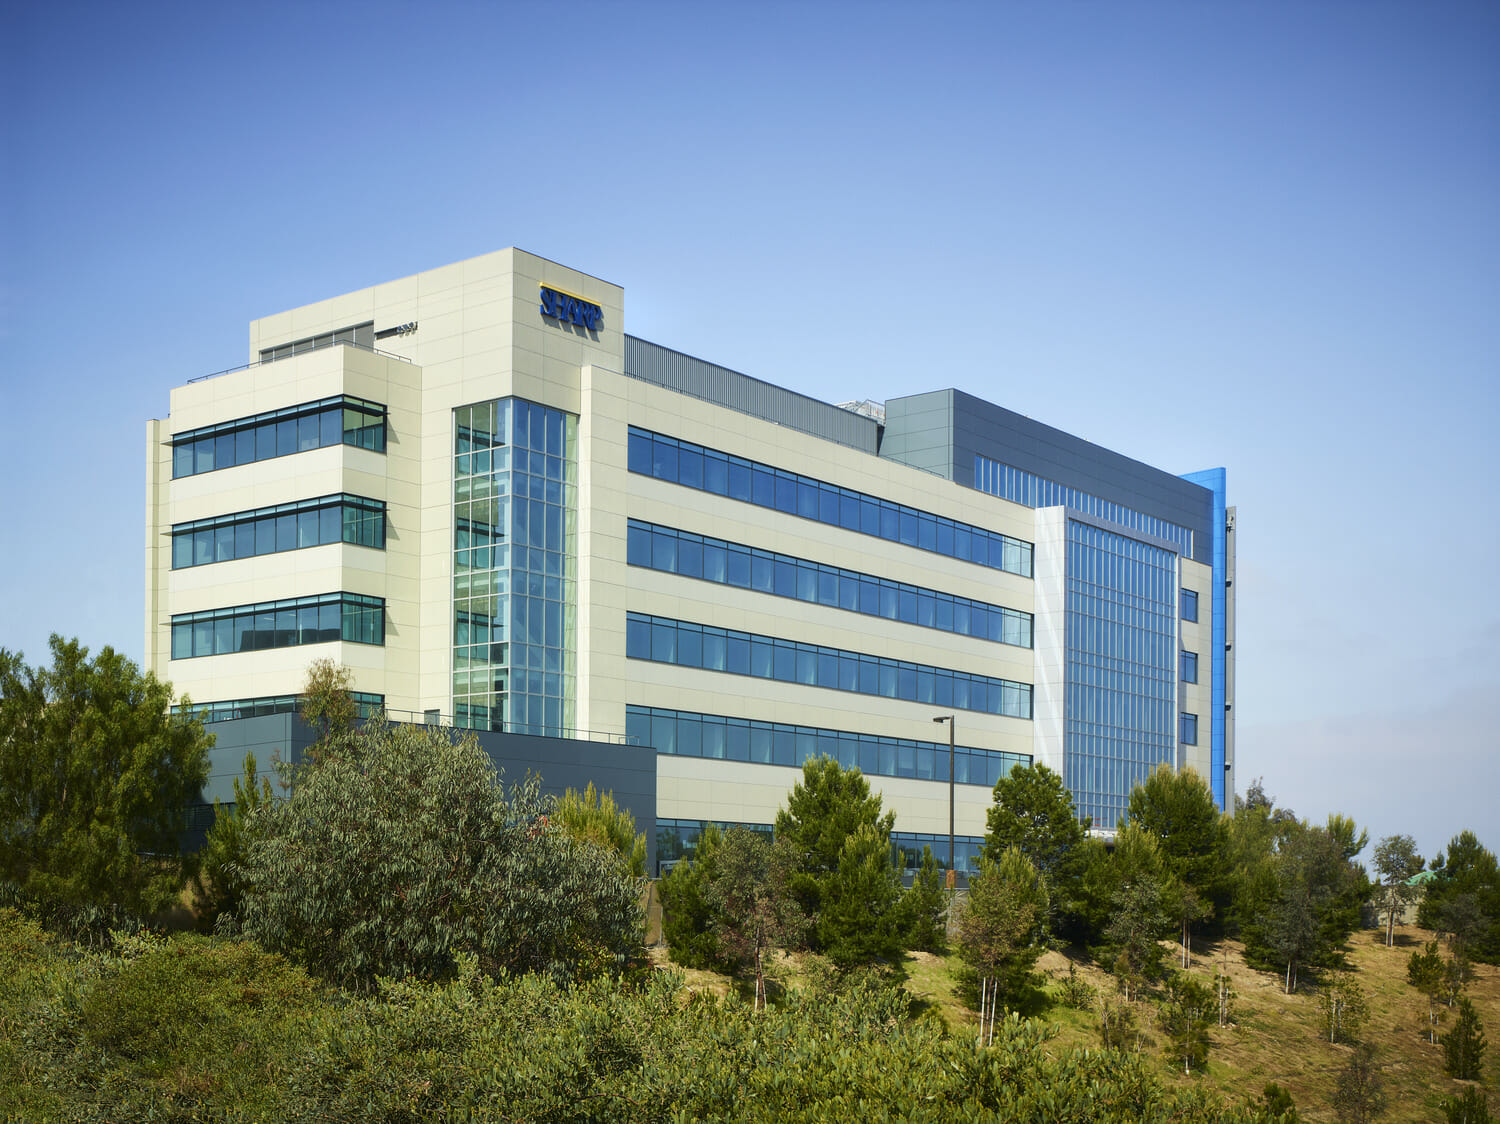 A large healthcare office building on top of a hill.